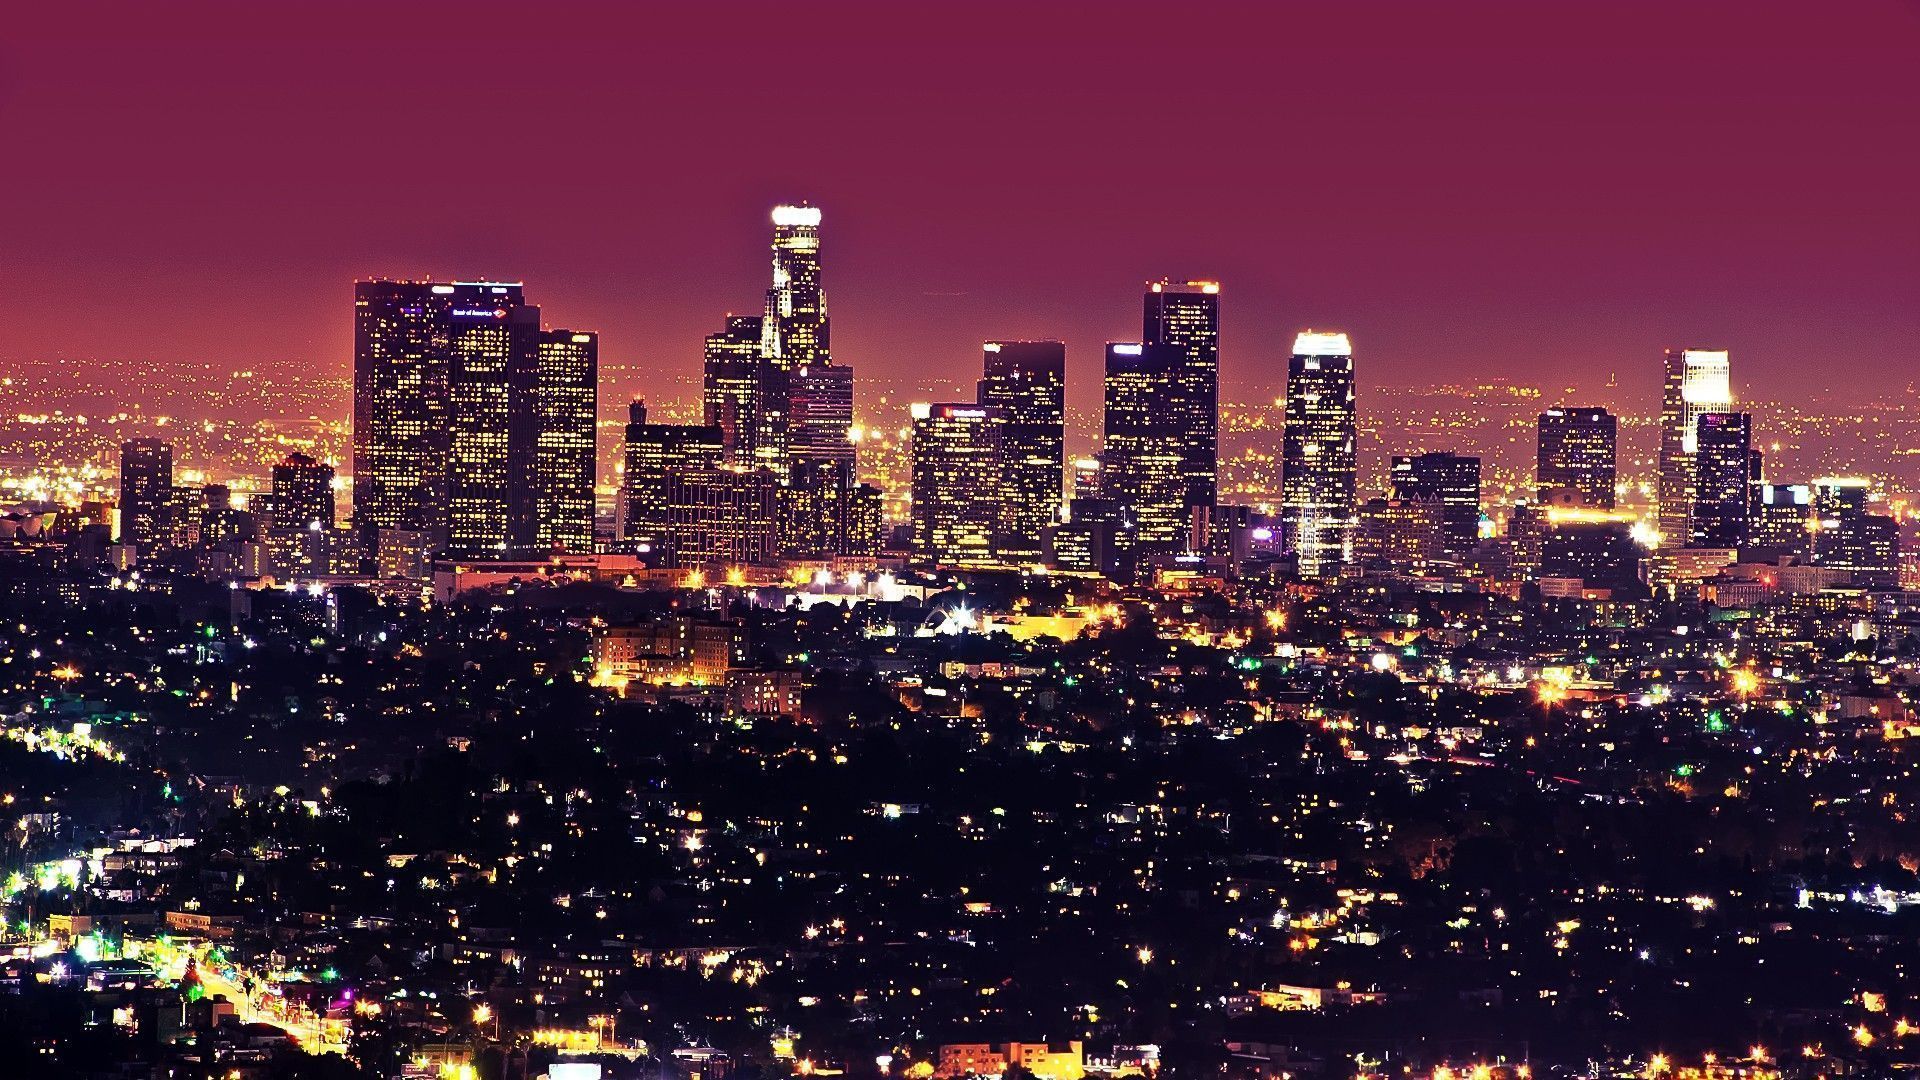 Los Angeles Wallpapers - Manualwall.com